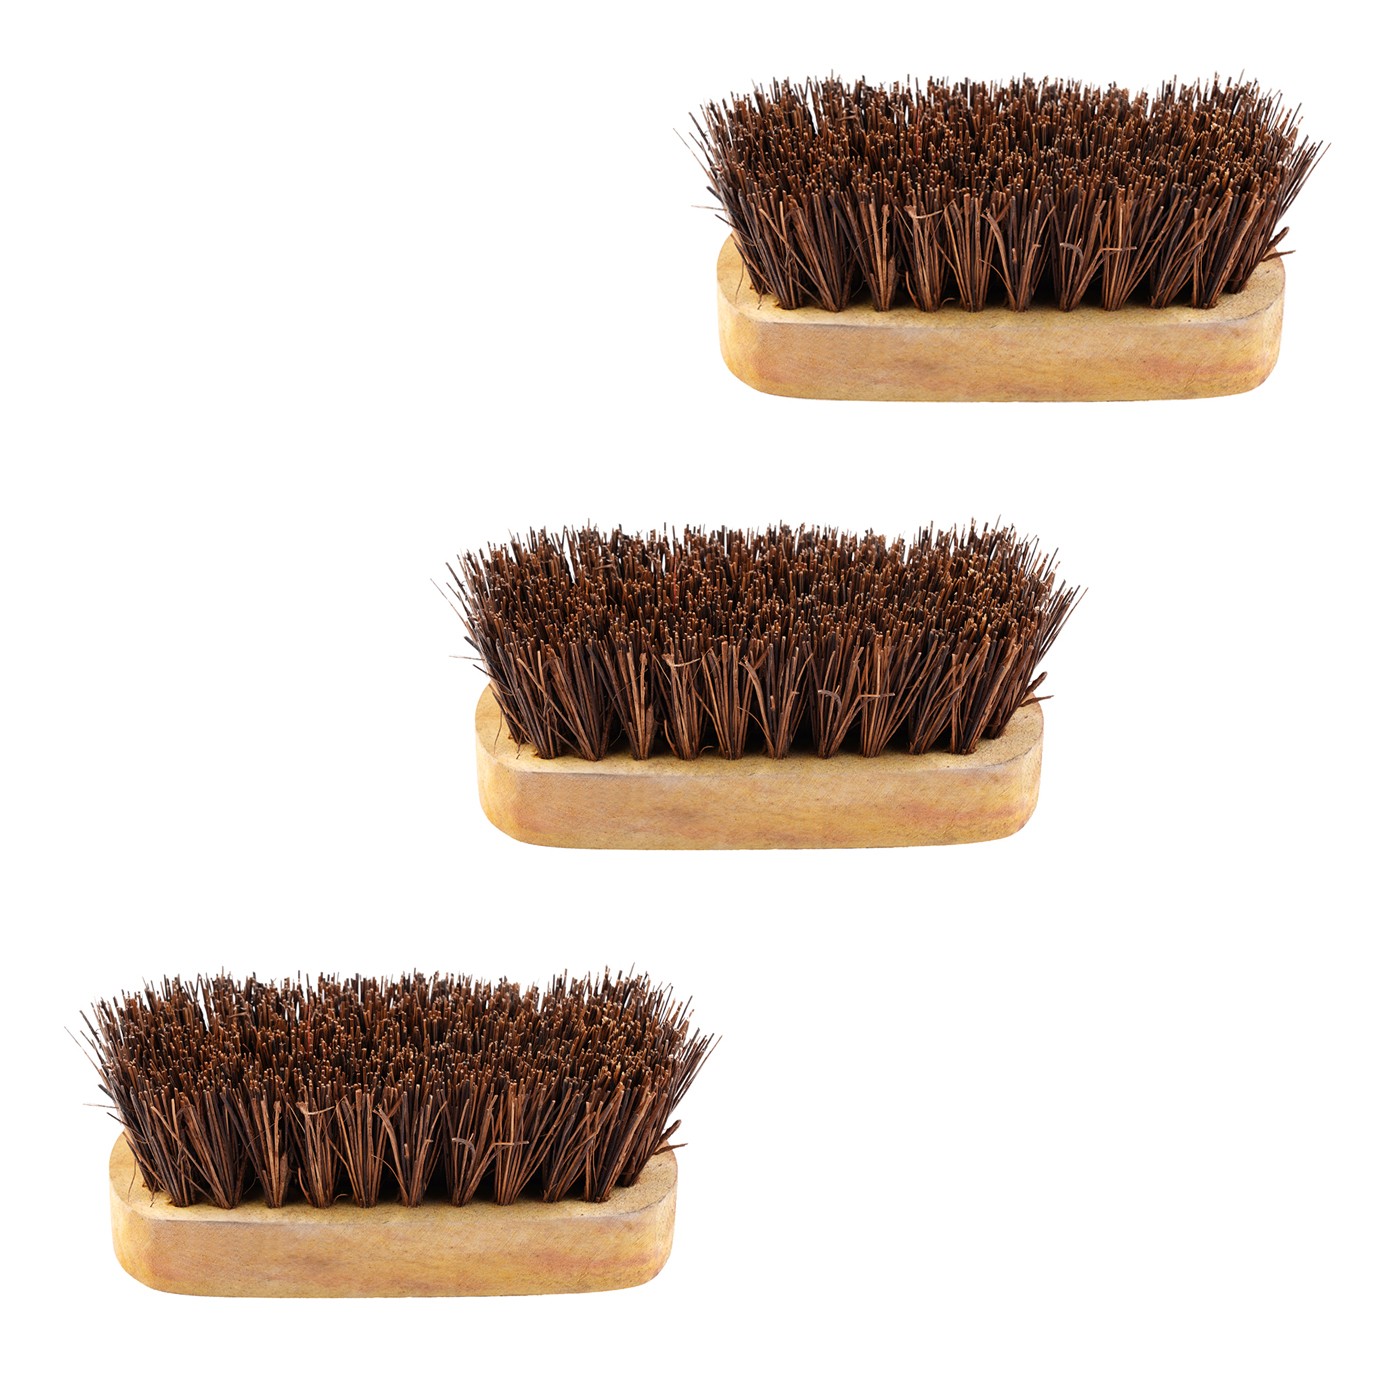 Multipurpose Strong Coir Washing Brush - Eco-Friendly Cleaning for Bathroom, Kitchen, Car Wheels, Home, Outdoor Spaces & Various Surfaces"-6 inch oval ( pack of 3 )